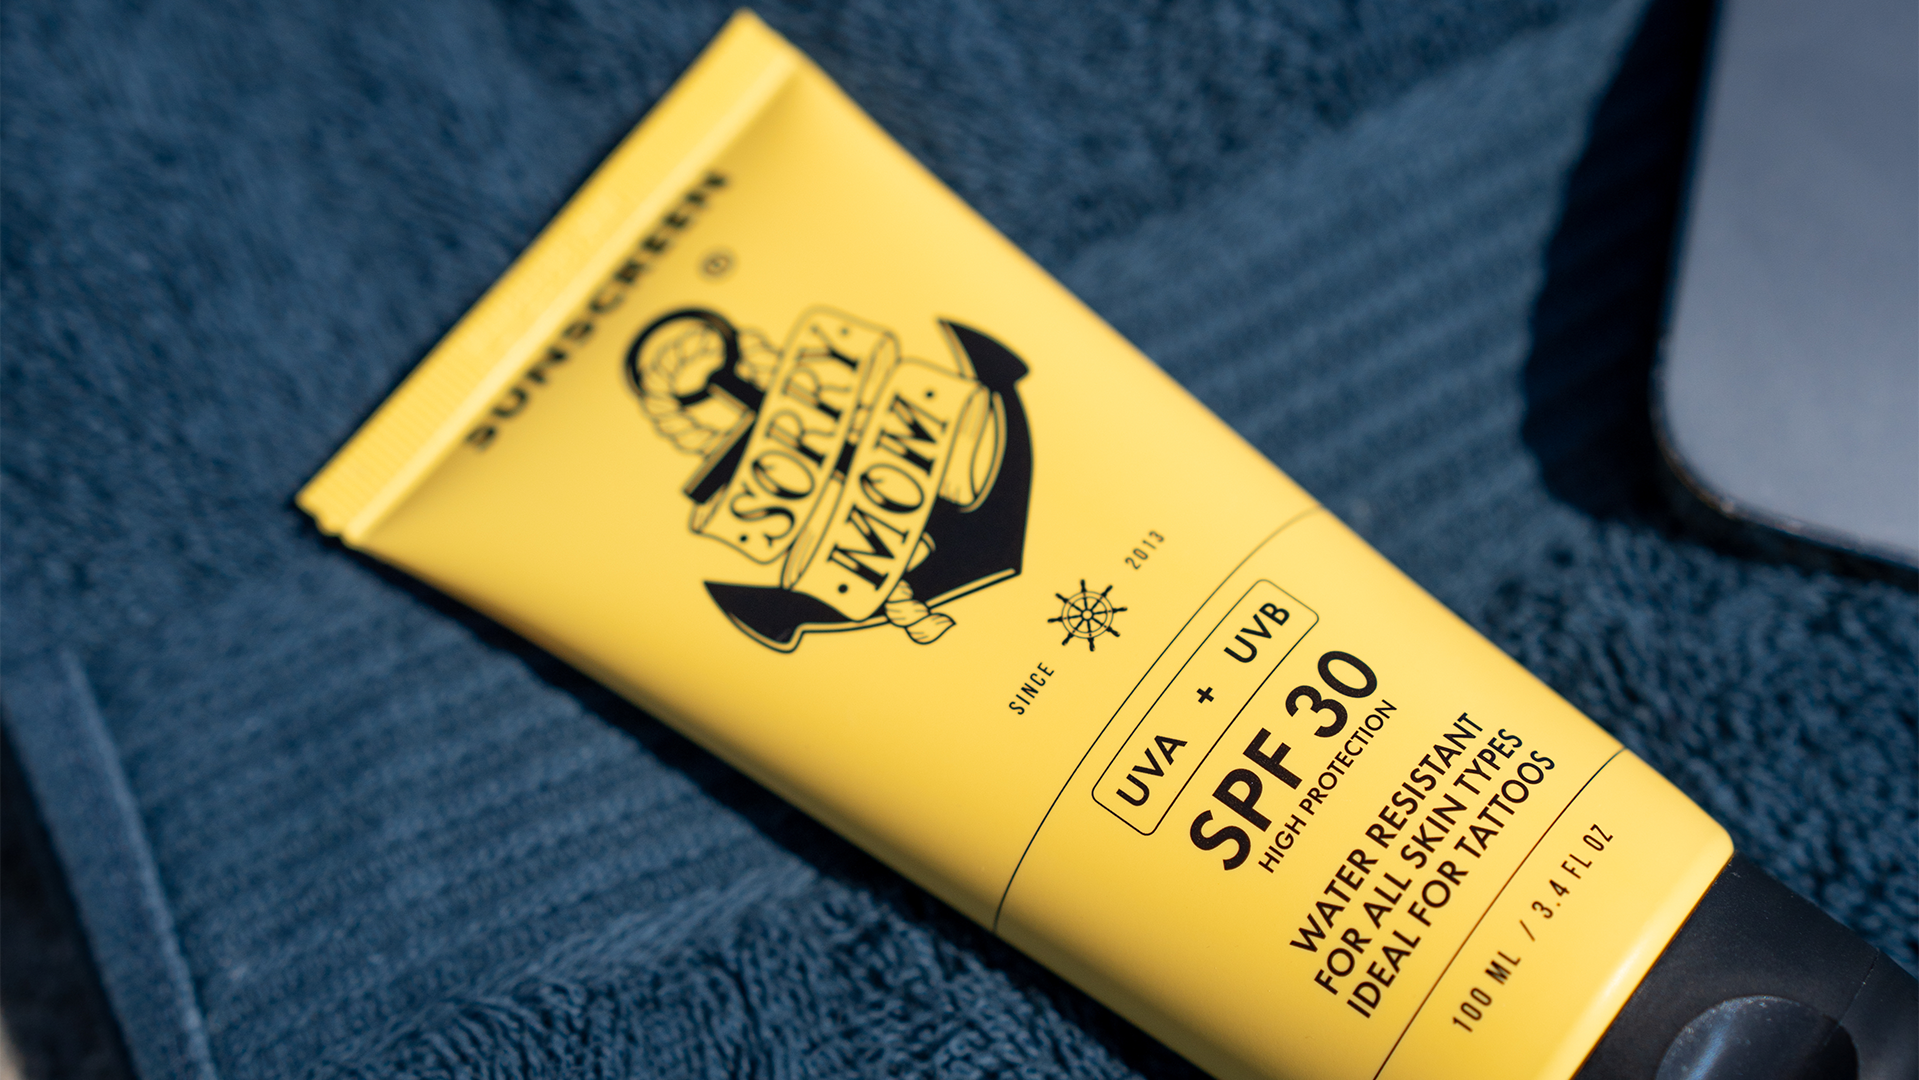 Use Sorry Mom Tattoo Sunscreen whenever you expose your tattoos to sunlight, whether you're at the beach, engaging in outdoor activities, or simply enjoying a sunny day.